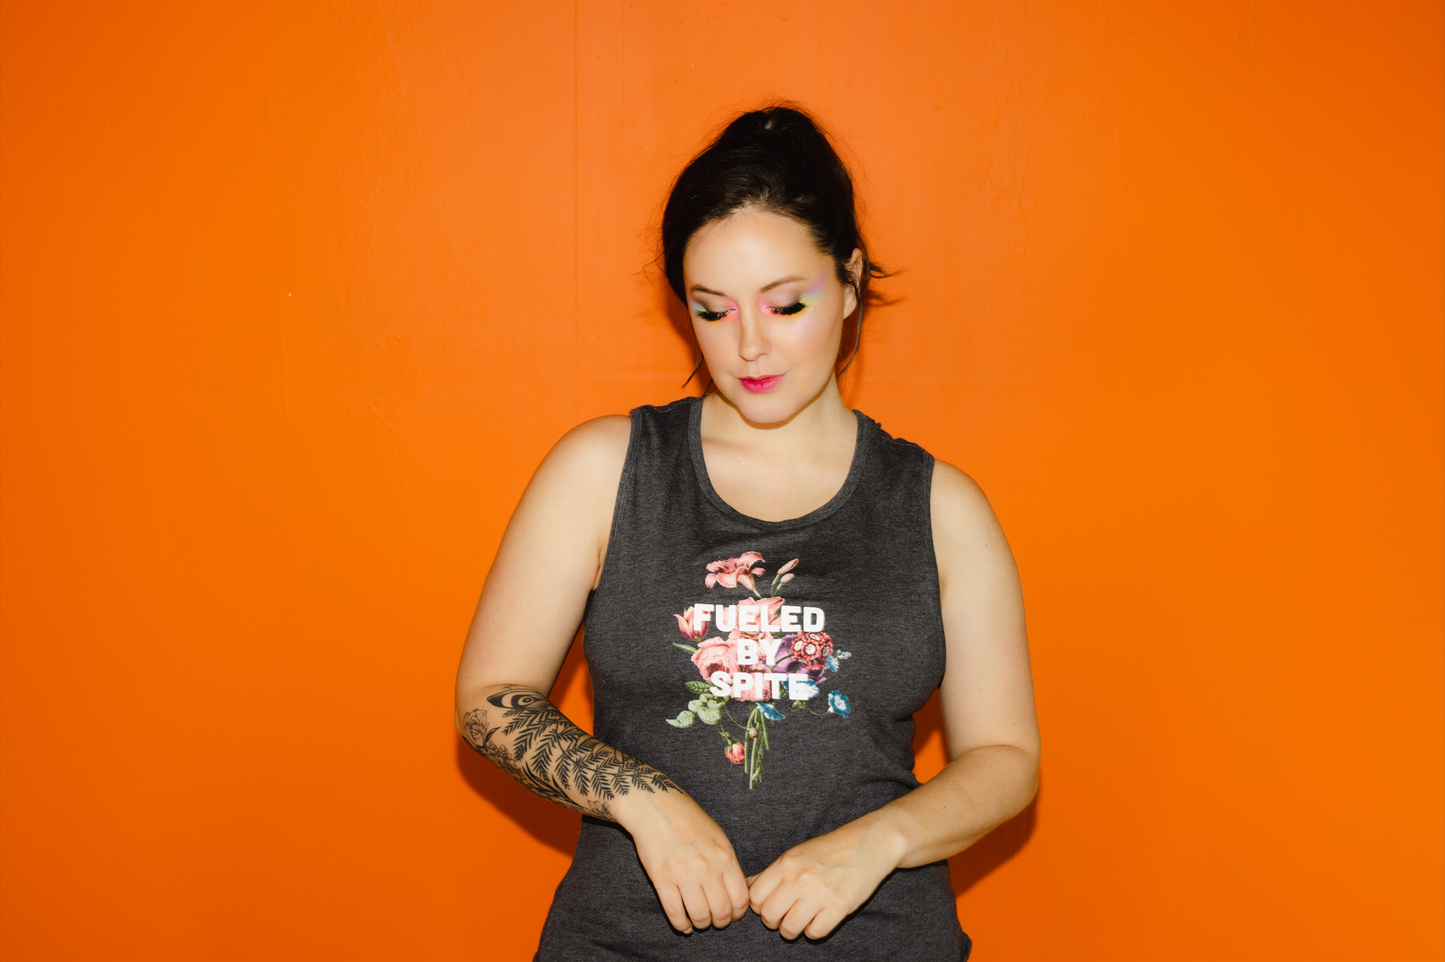 Fueled By Spite Floral Women's Jersey Muscle Tank